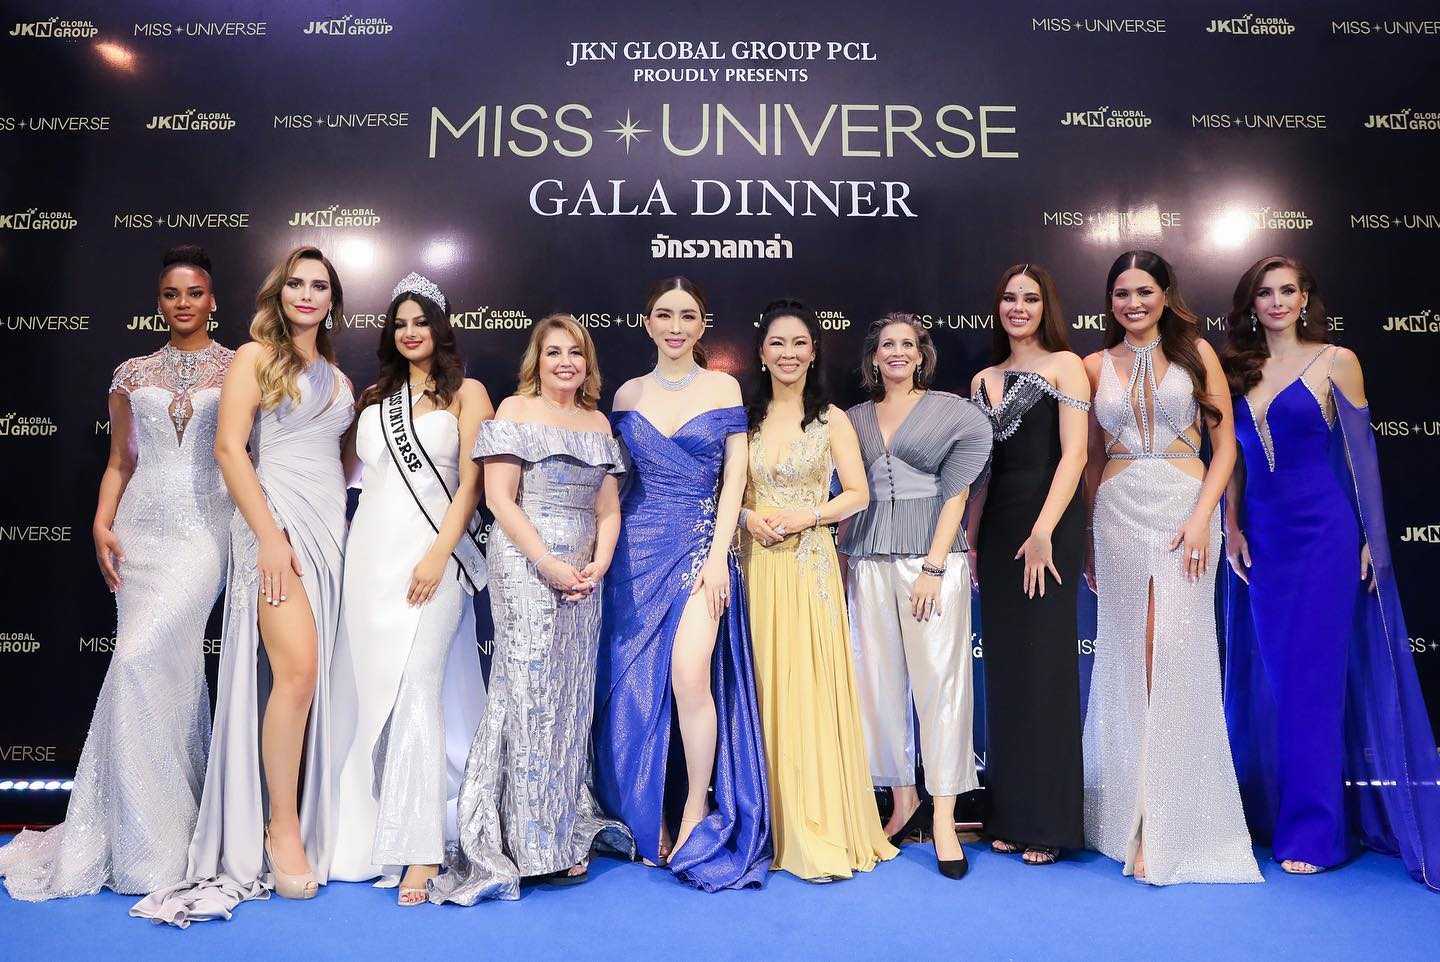 Miss Universe removes required age limit for aspiring candidates